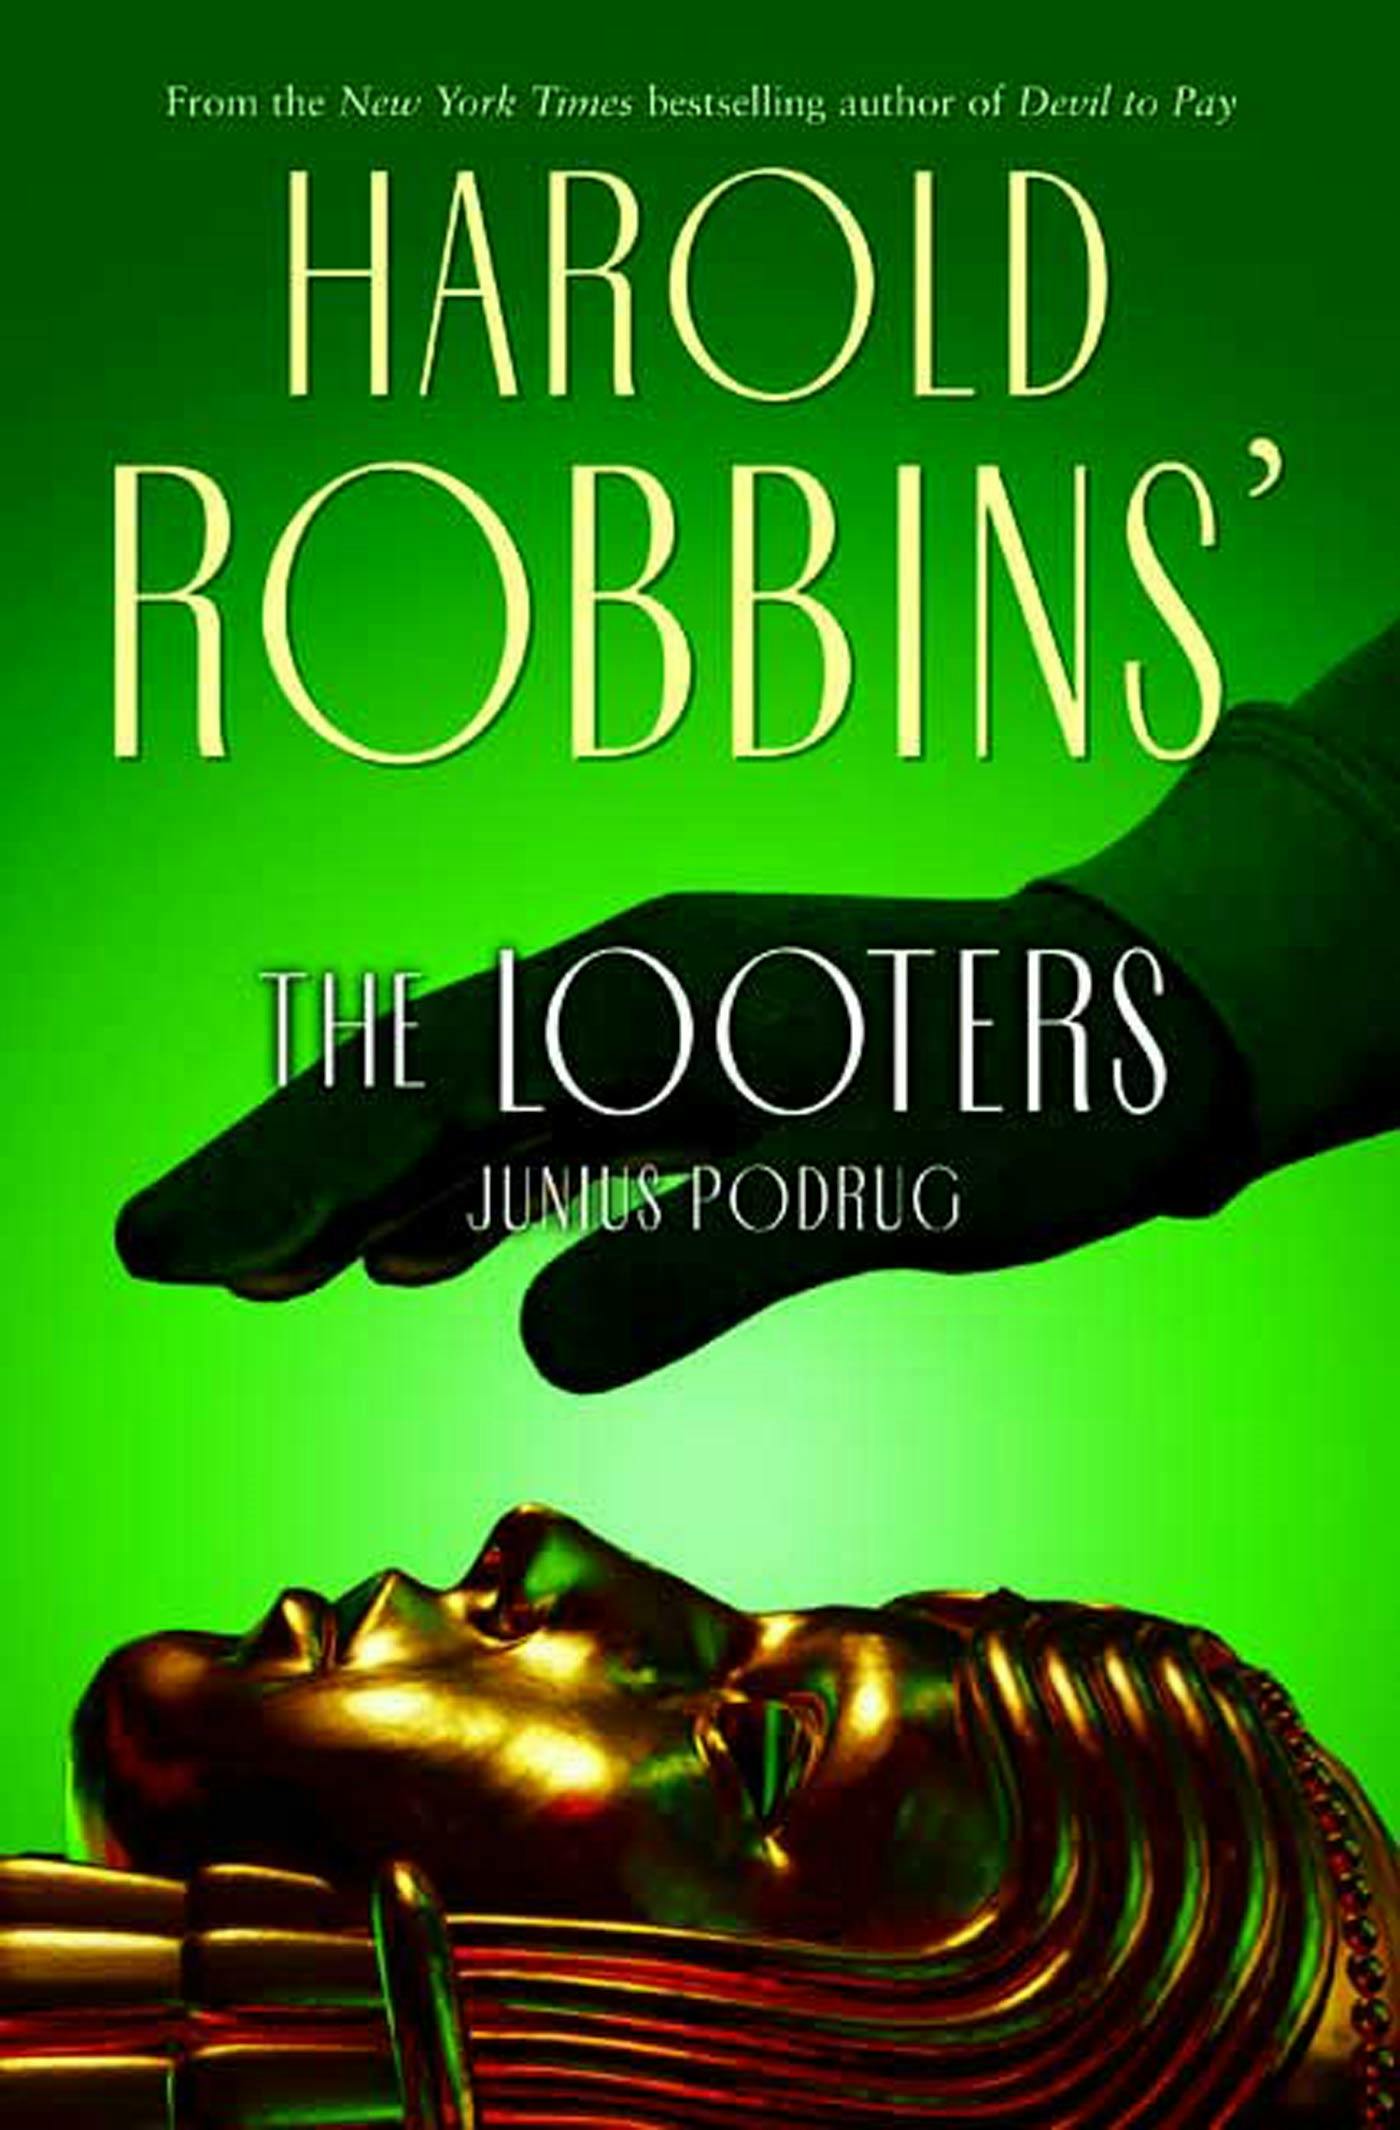 Cover for the book titled as: The Looters